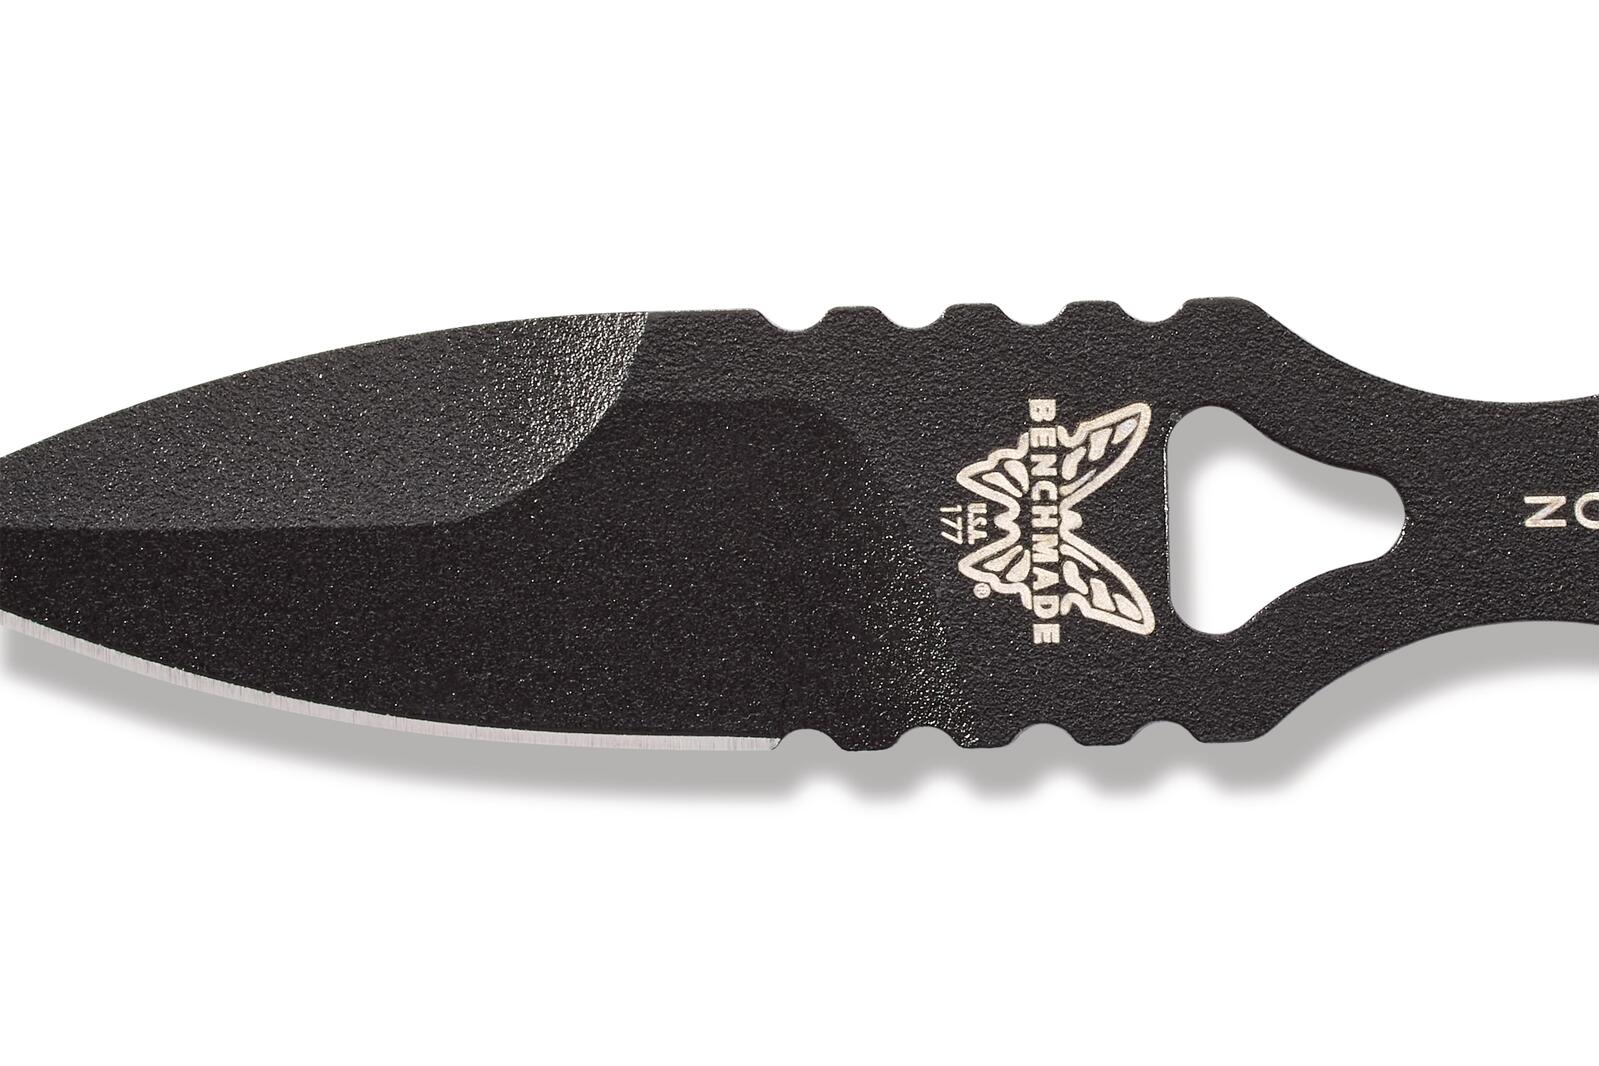 Benchmade 177BK Thompson Mini SOCP (Special Operations Combatives Program) - Spear Point Fixed Blade with Sheath - Wander Outdoors